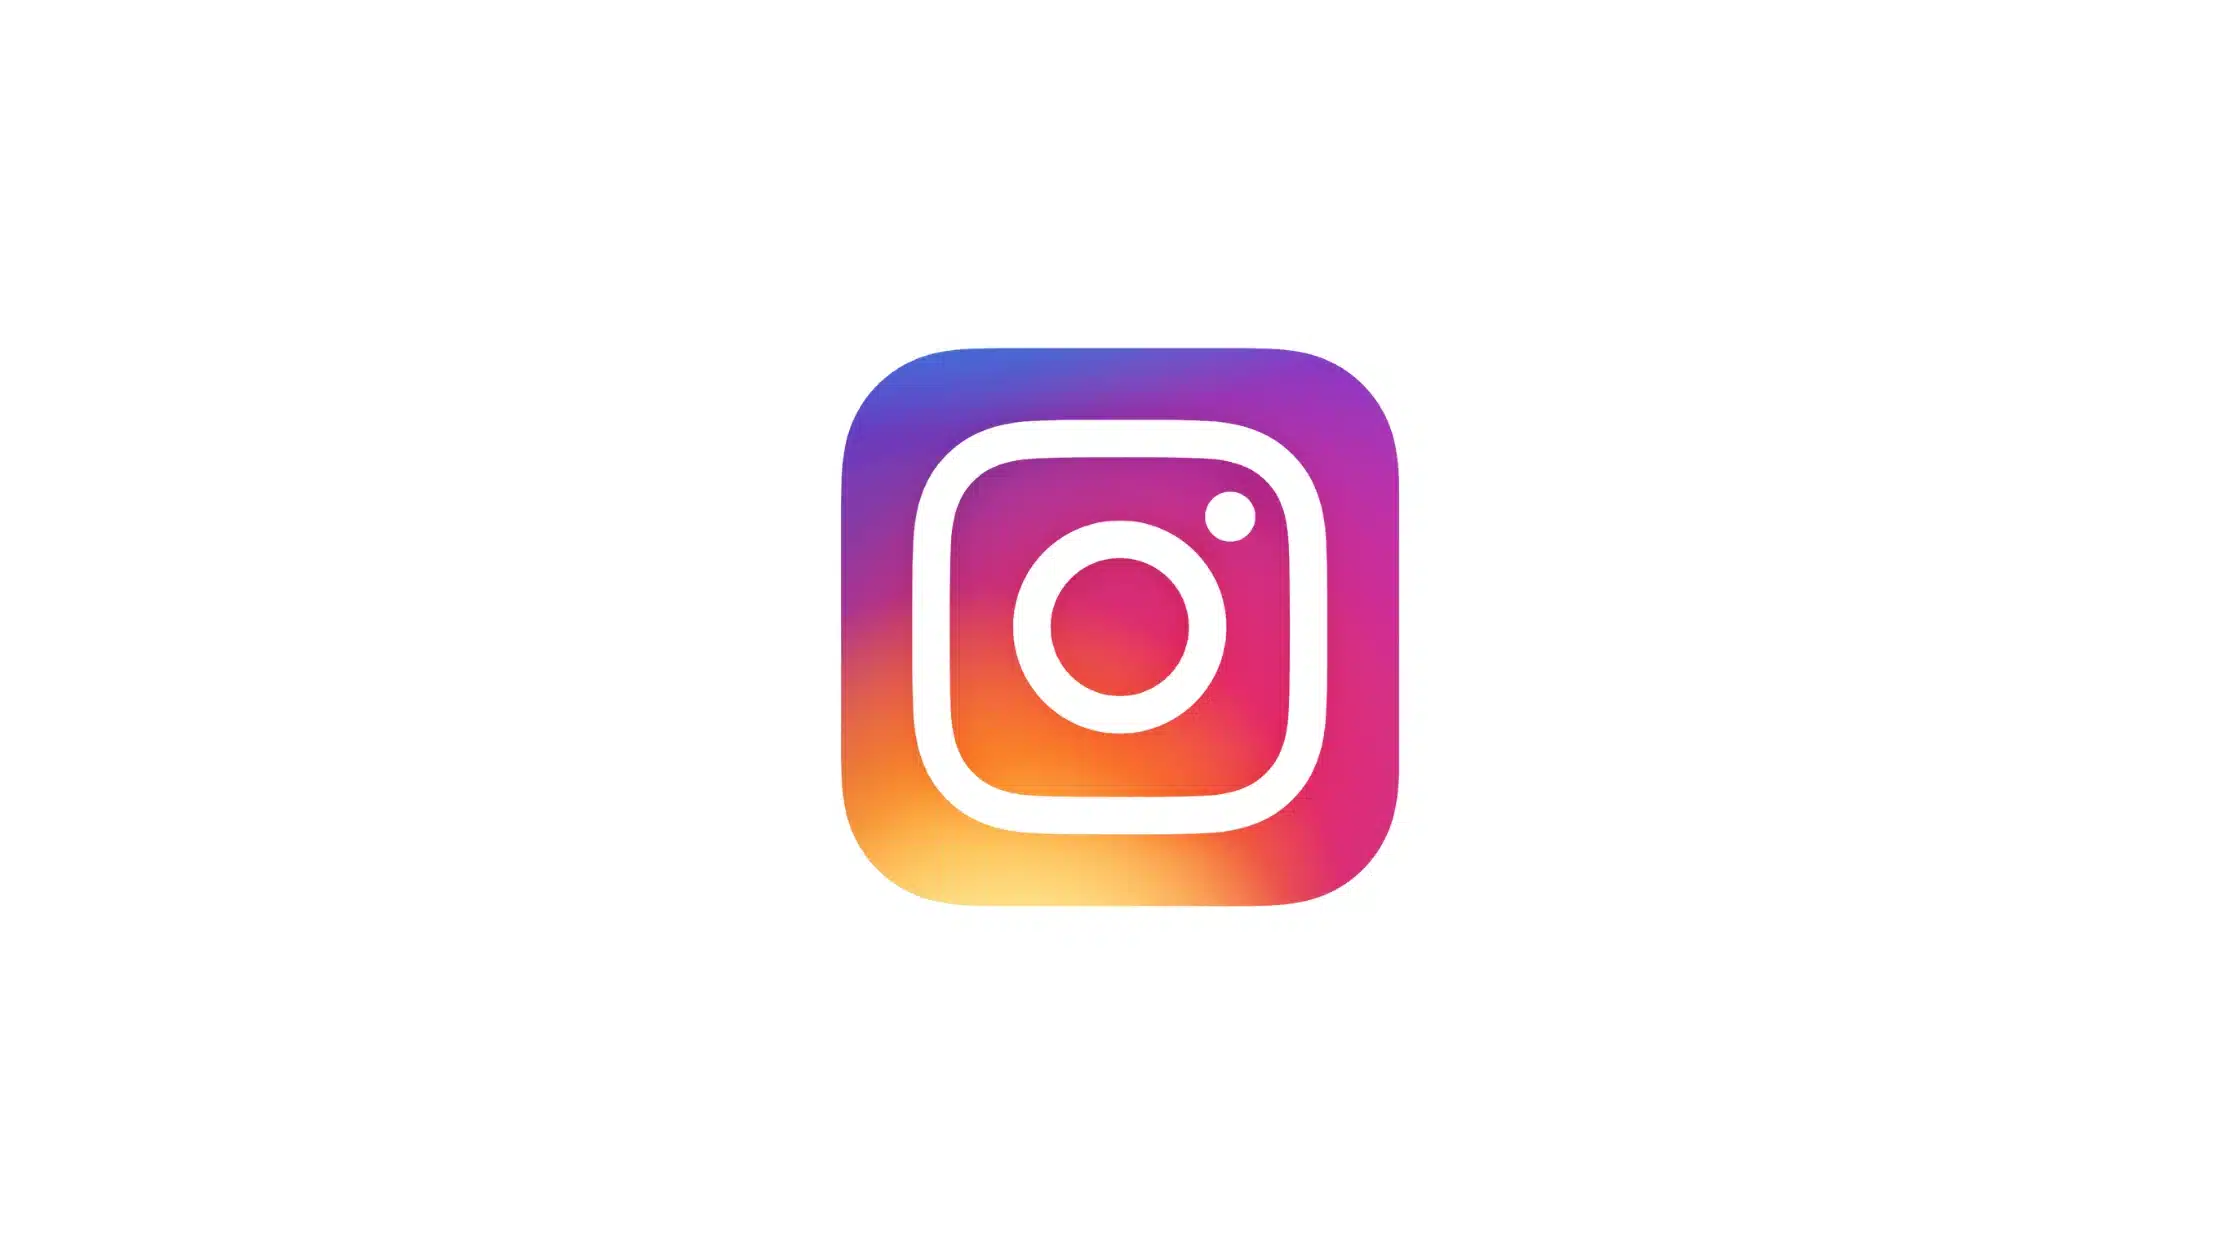 What Fonts Does Instagram Use?